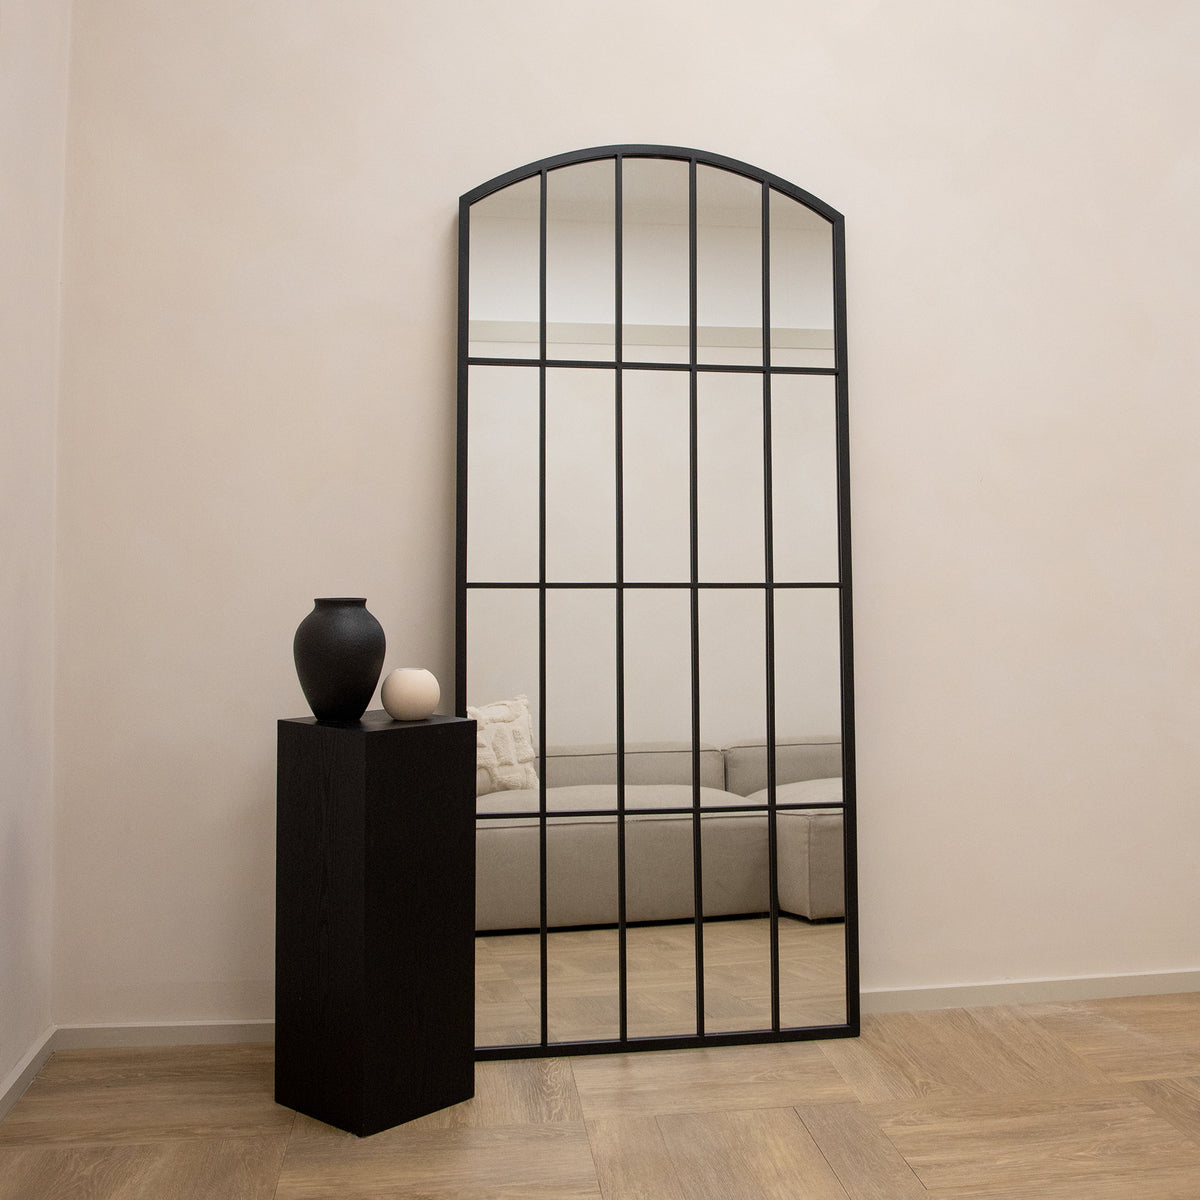 Full length black metal window mirror leaning against wall with ceramics